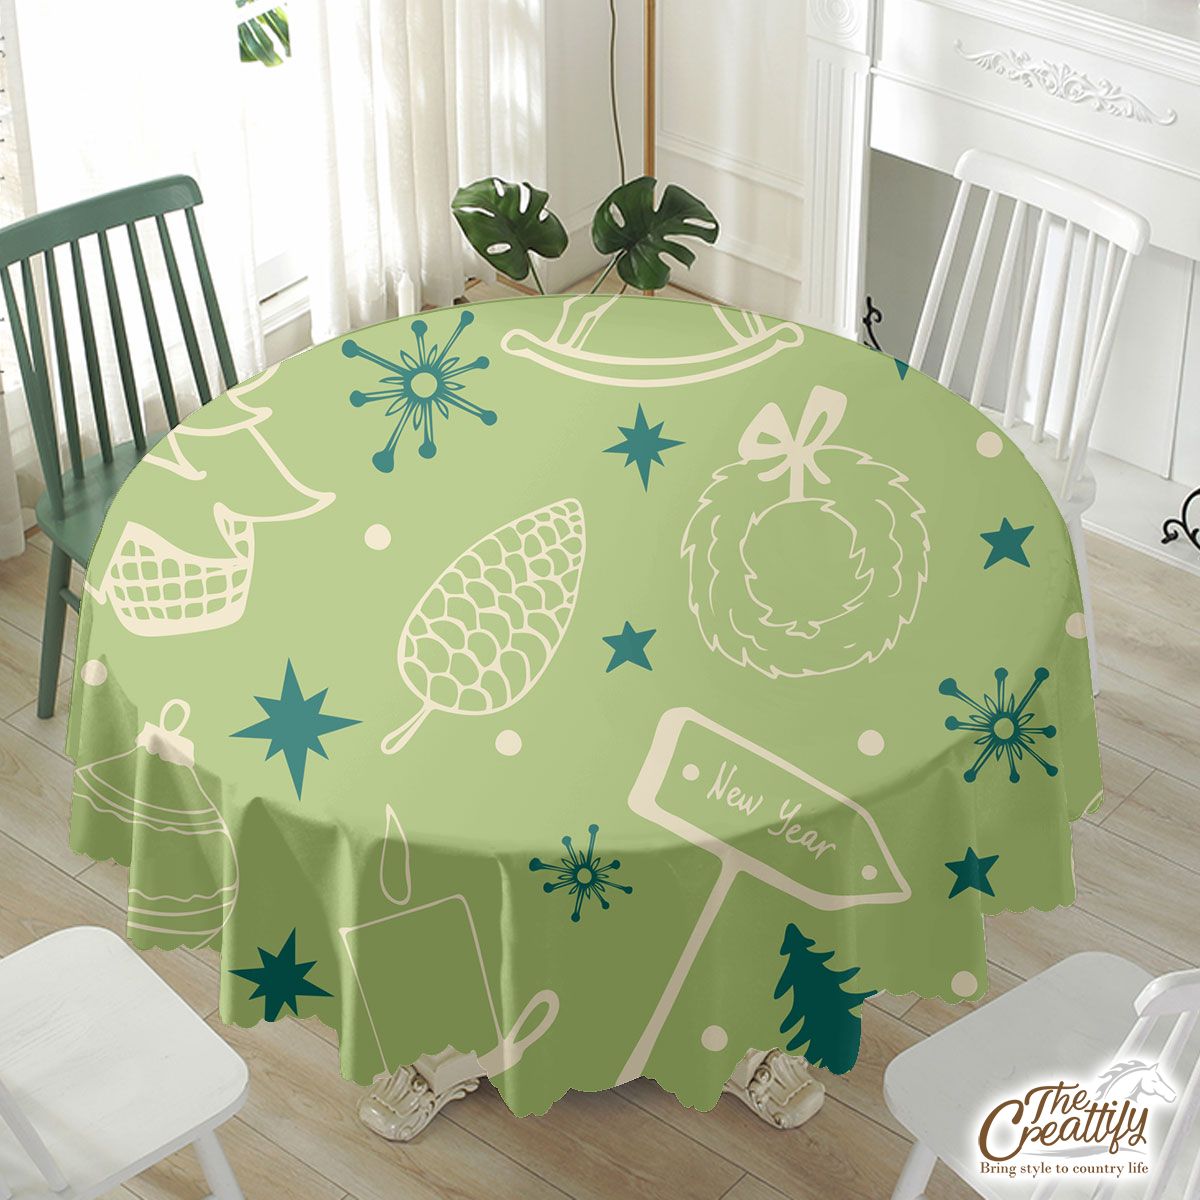 Christmas Balls, Pine Tree Silhouette On The Snowflake Background Waterproof Tablecloth